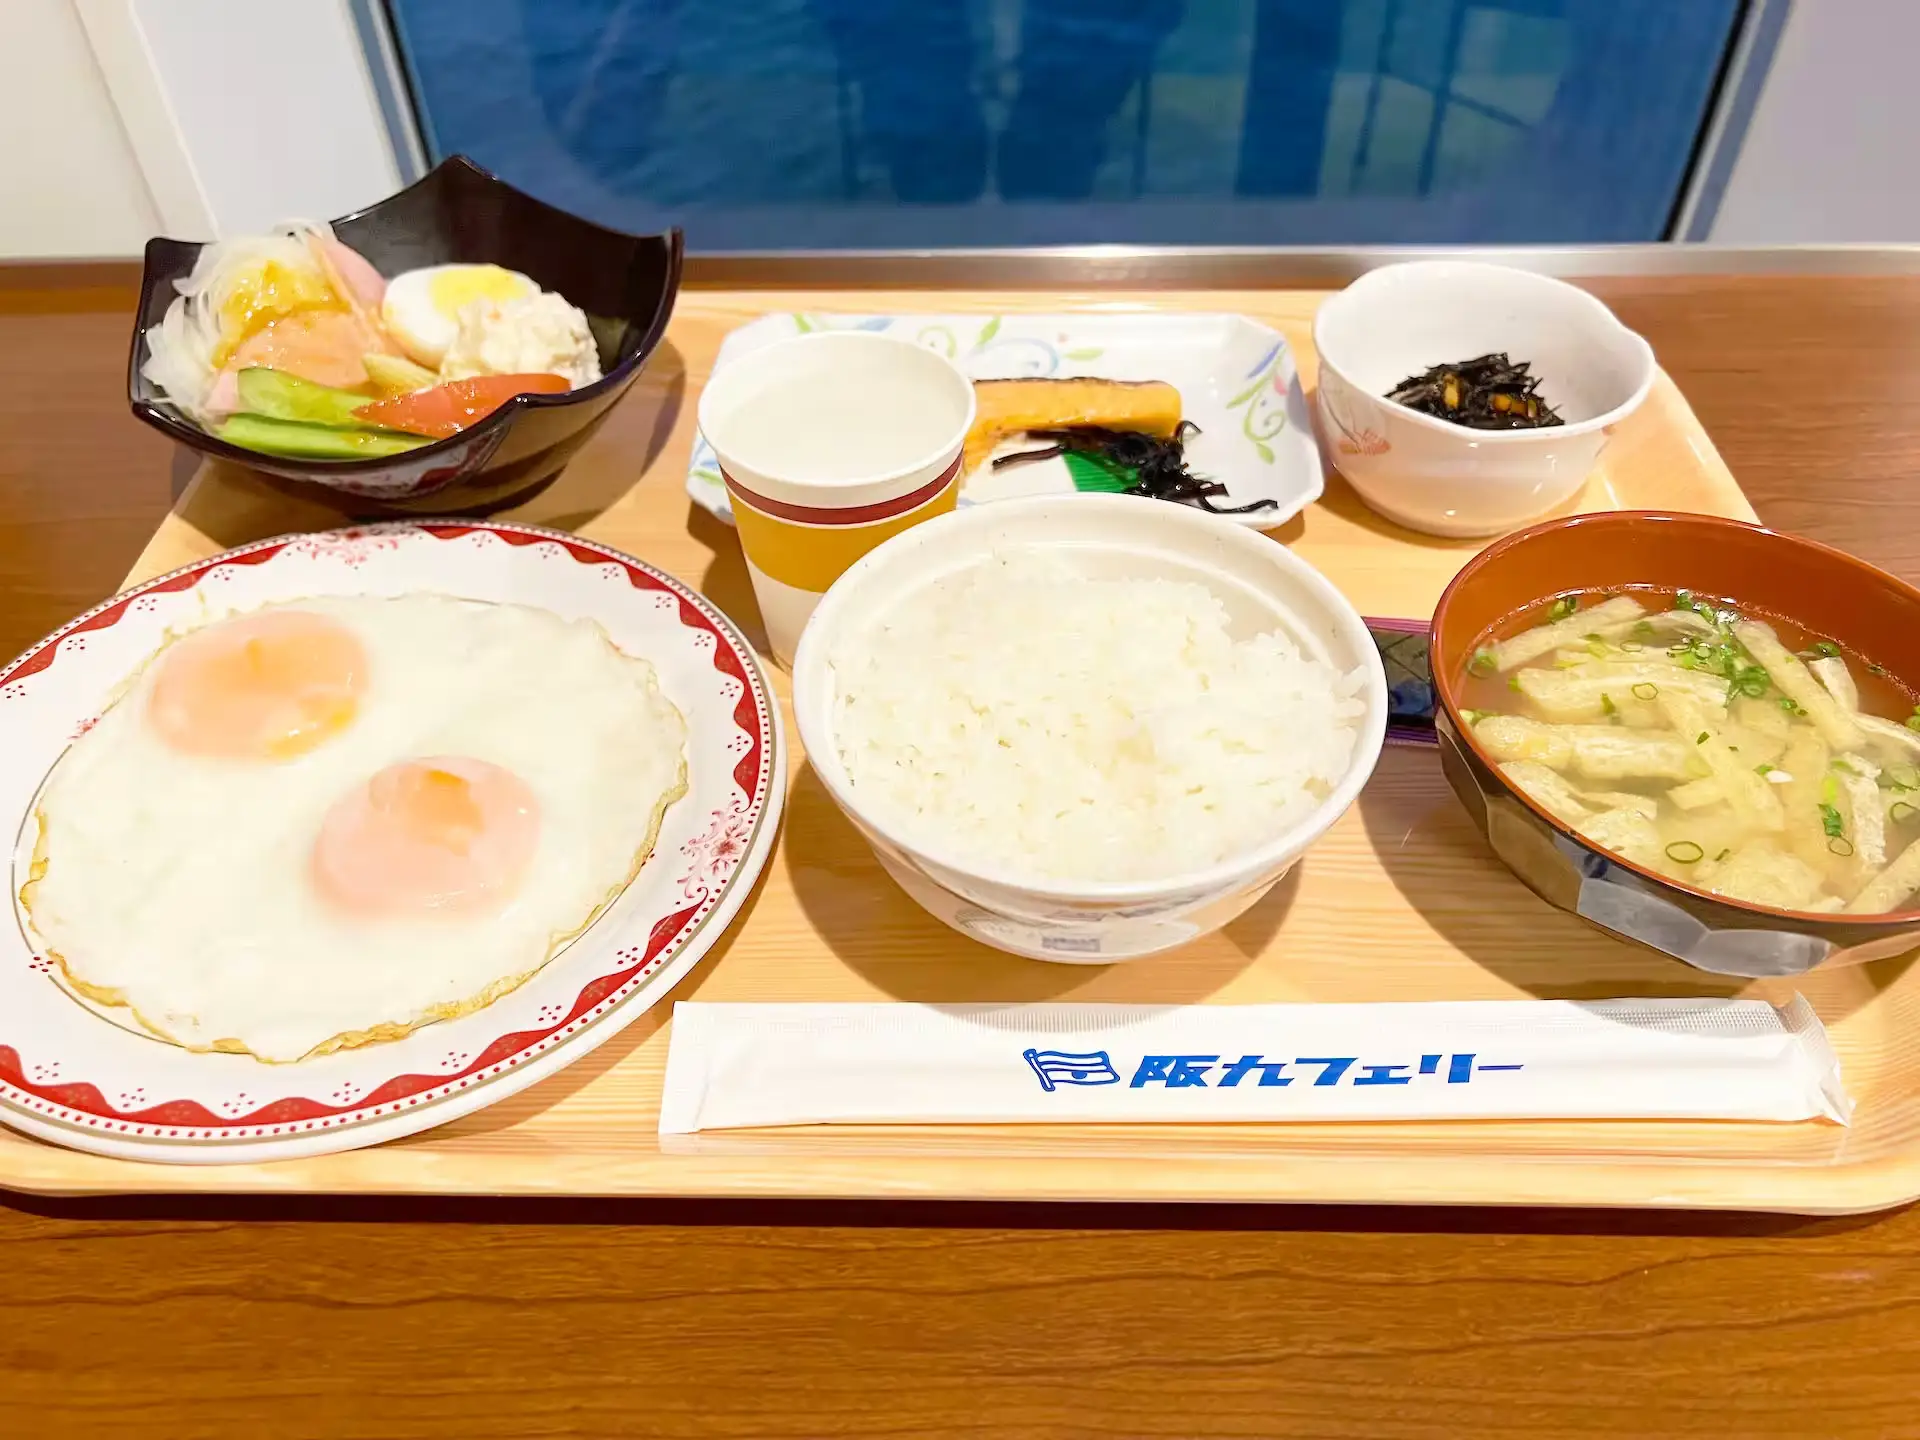 Plate of breakfast offerings at the Hankyu Ferry Yamato Restaurant